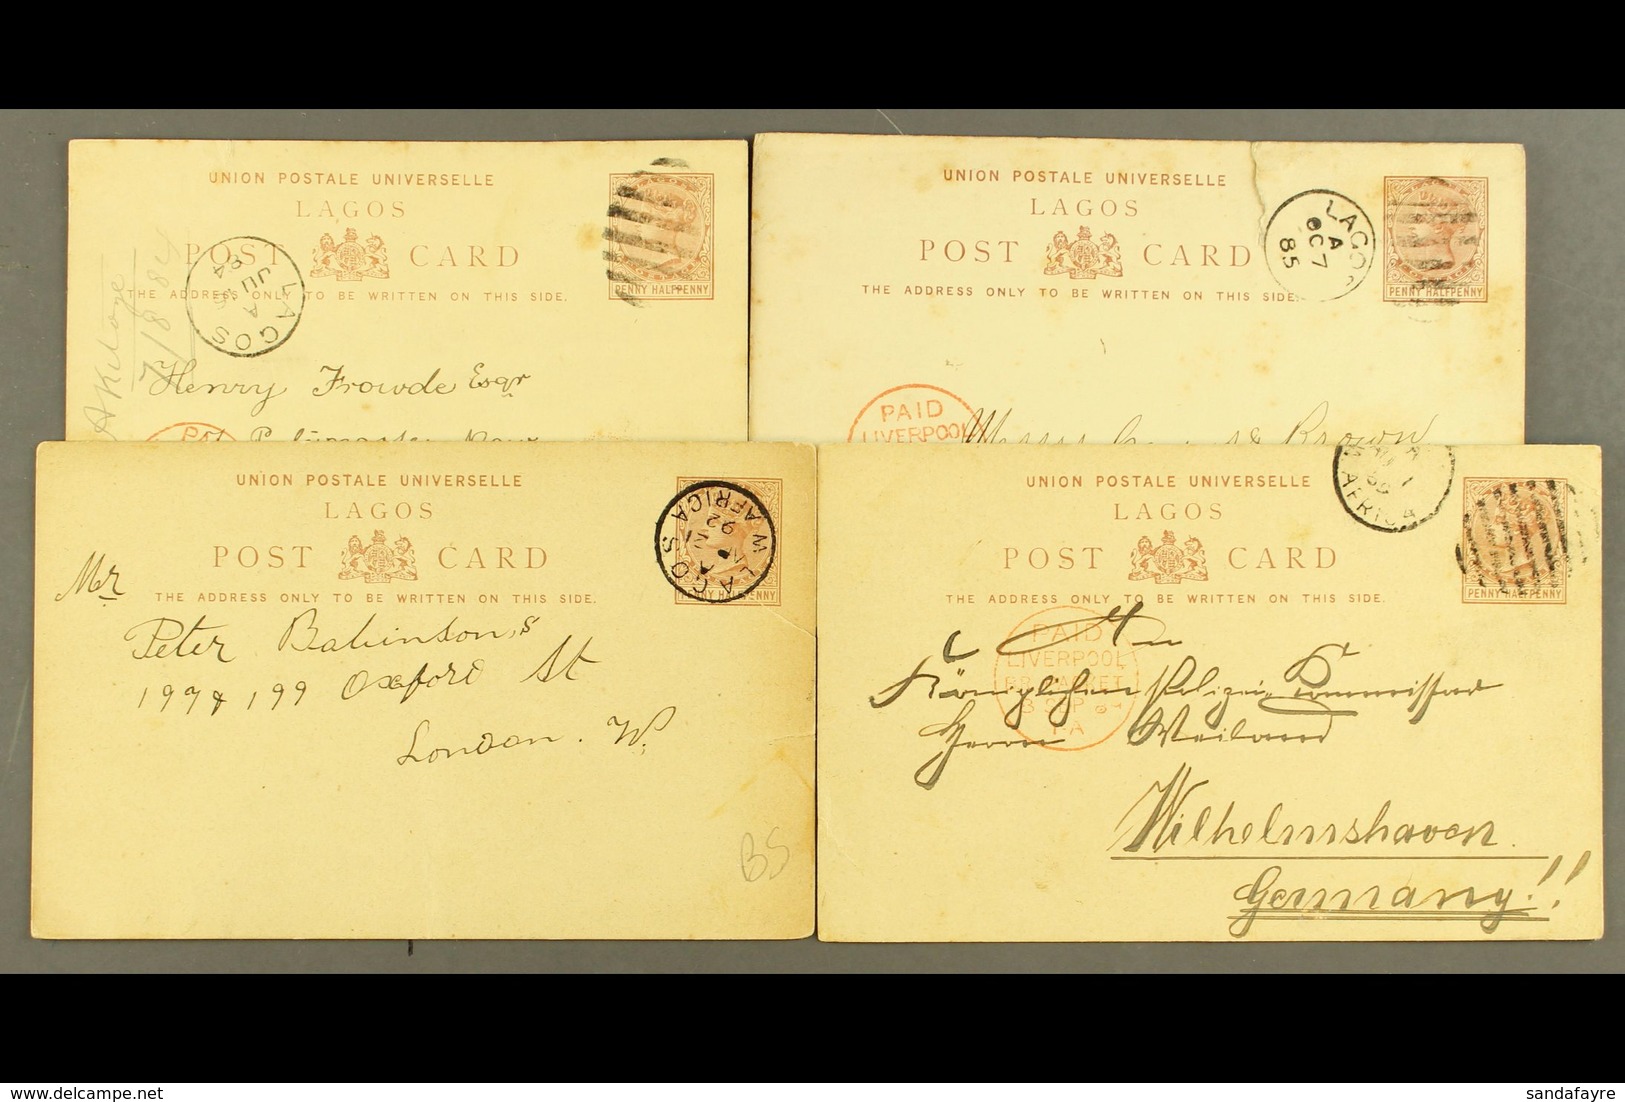 1884-1901 STATIONERY POSTCARDS 1½d Commercially Used To England (3) Or Germany (4) With Lagos Bars Or Cds Cancels, All B - Nigeria (...-1960)